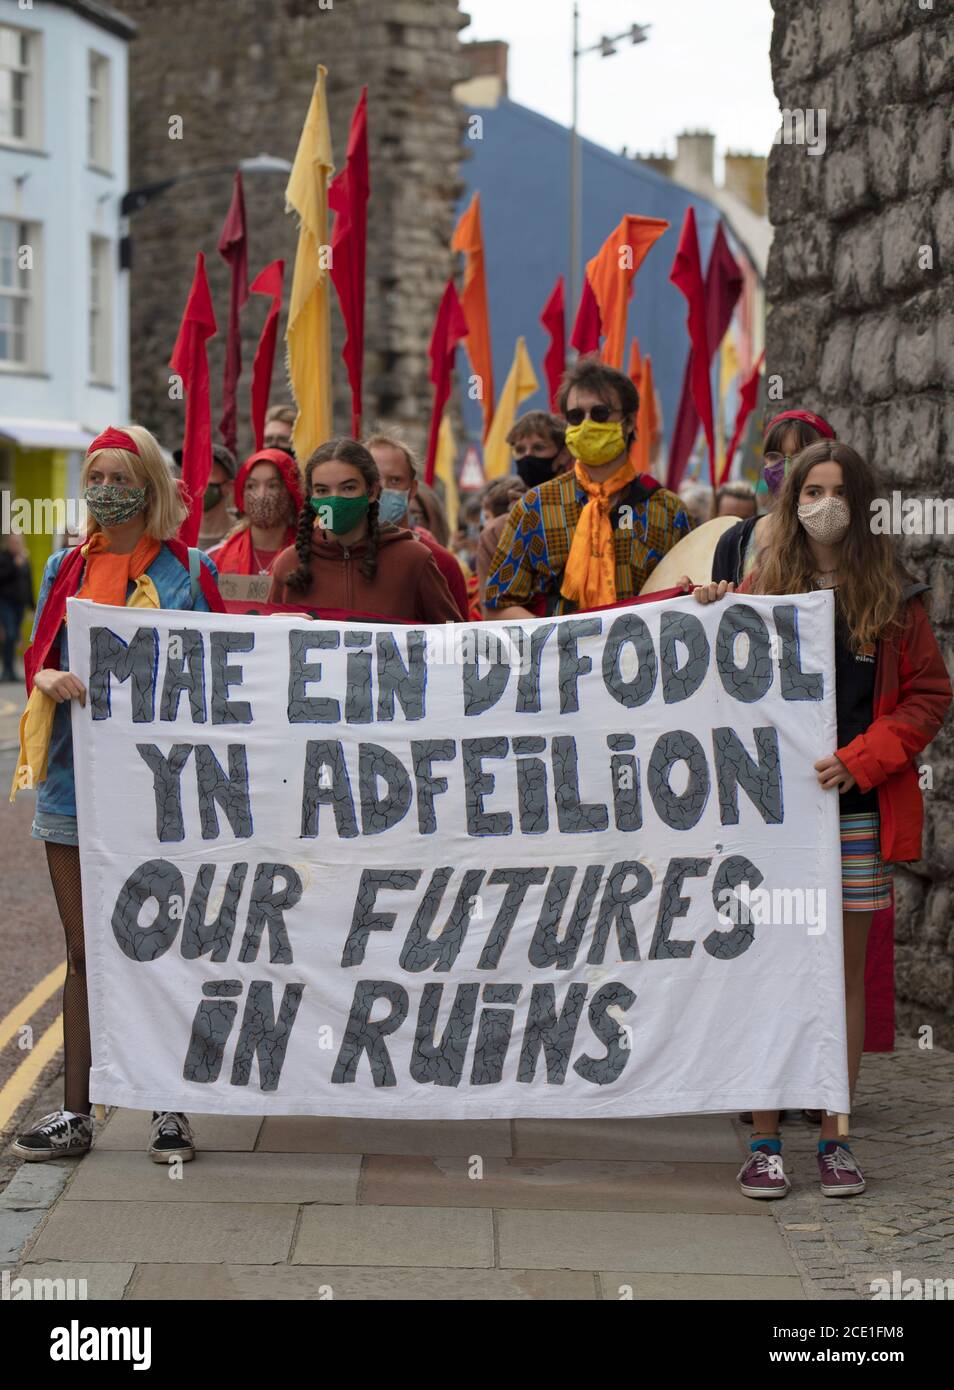 Caernarfon Castle, Wales, UK. 30 August 2020, Extinction Rebellion Protestors and Red Rebel Brigade take over Caernarfon Castle to protest about climate change and global warming. Children's shoes signify that it is the children that will suffer in the future. Protestors hold a banner stating our future in ruins carrying red, orange and yellow flags Credit: Denise Laura Baker/Alamy Live News Stock Photo